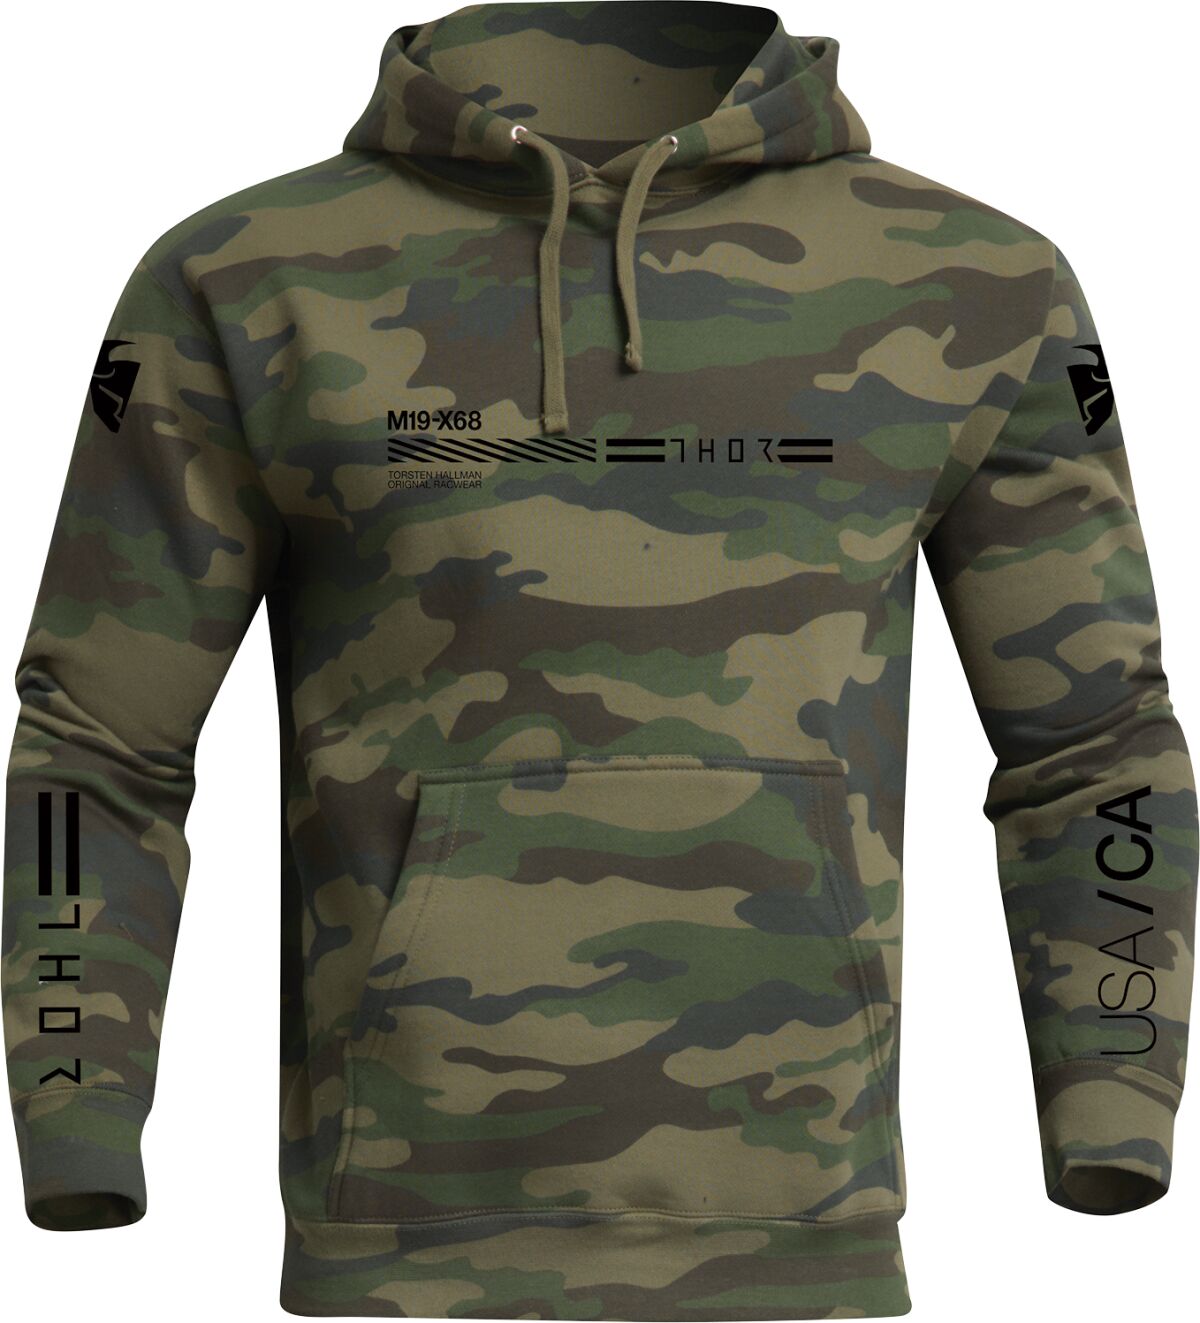 Division Pullover